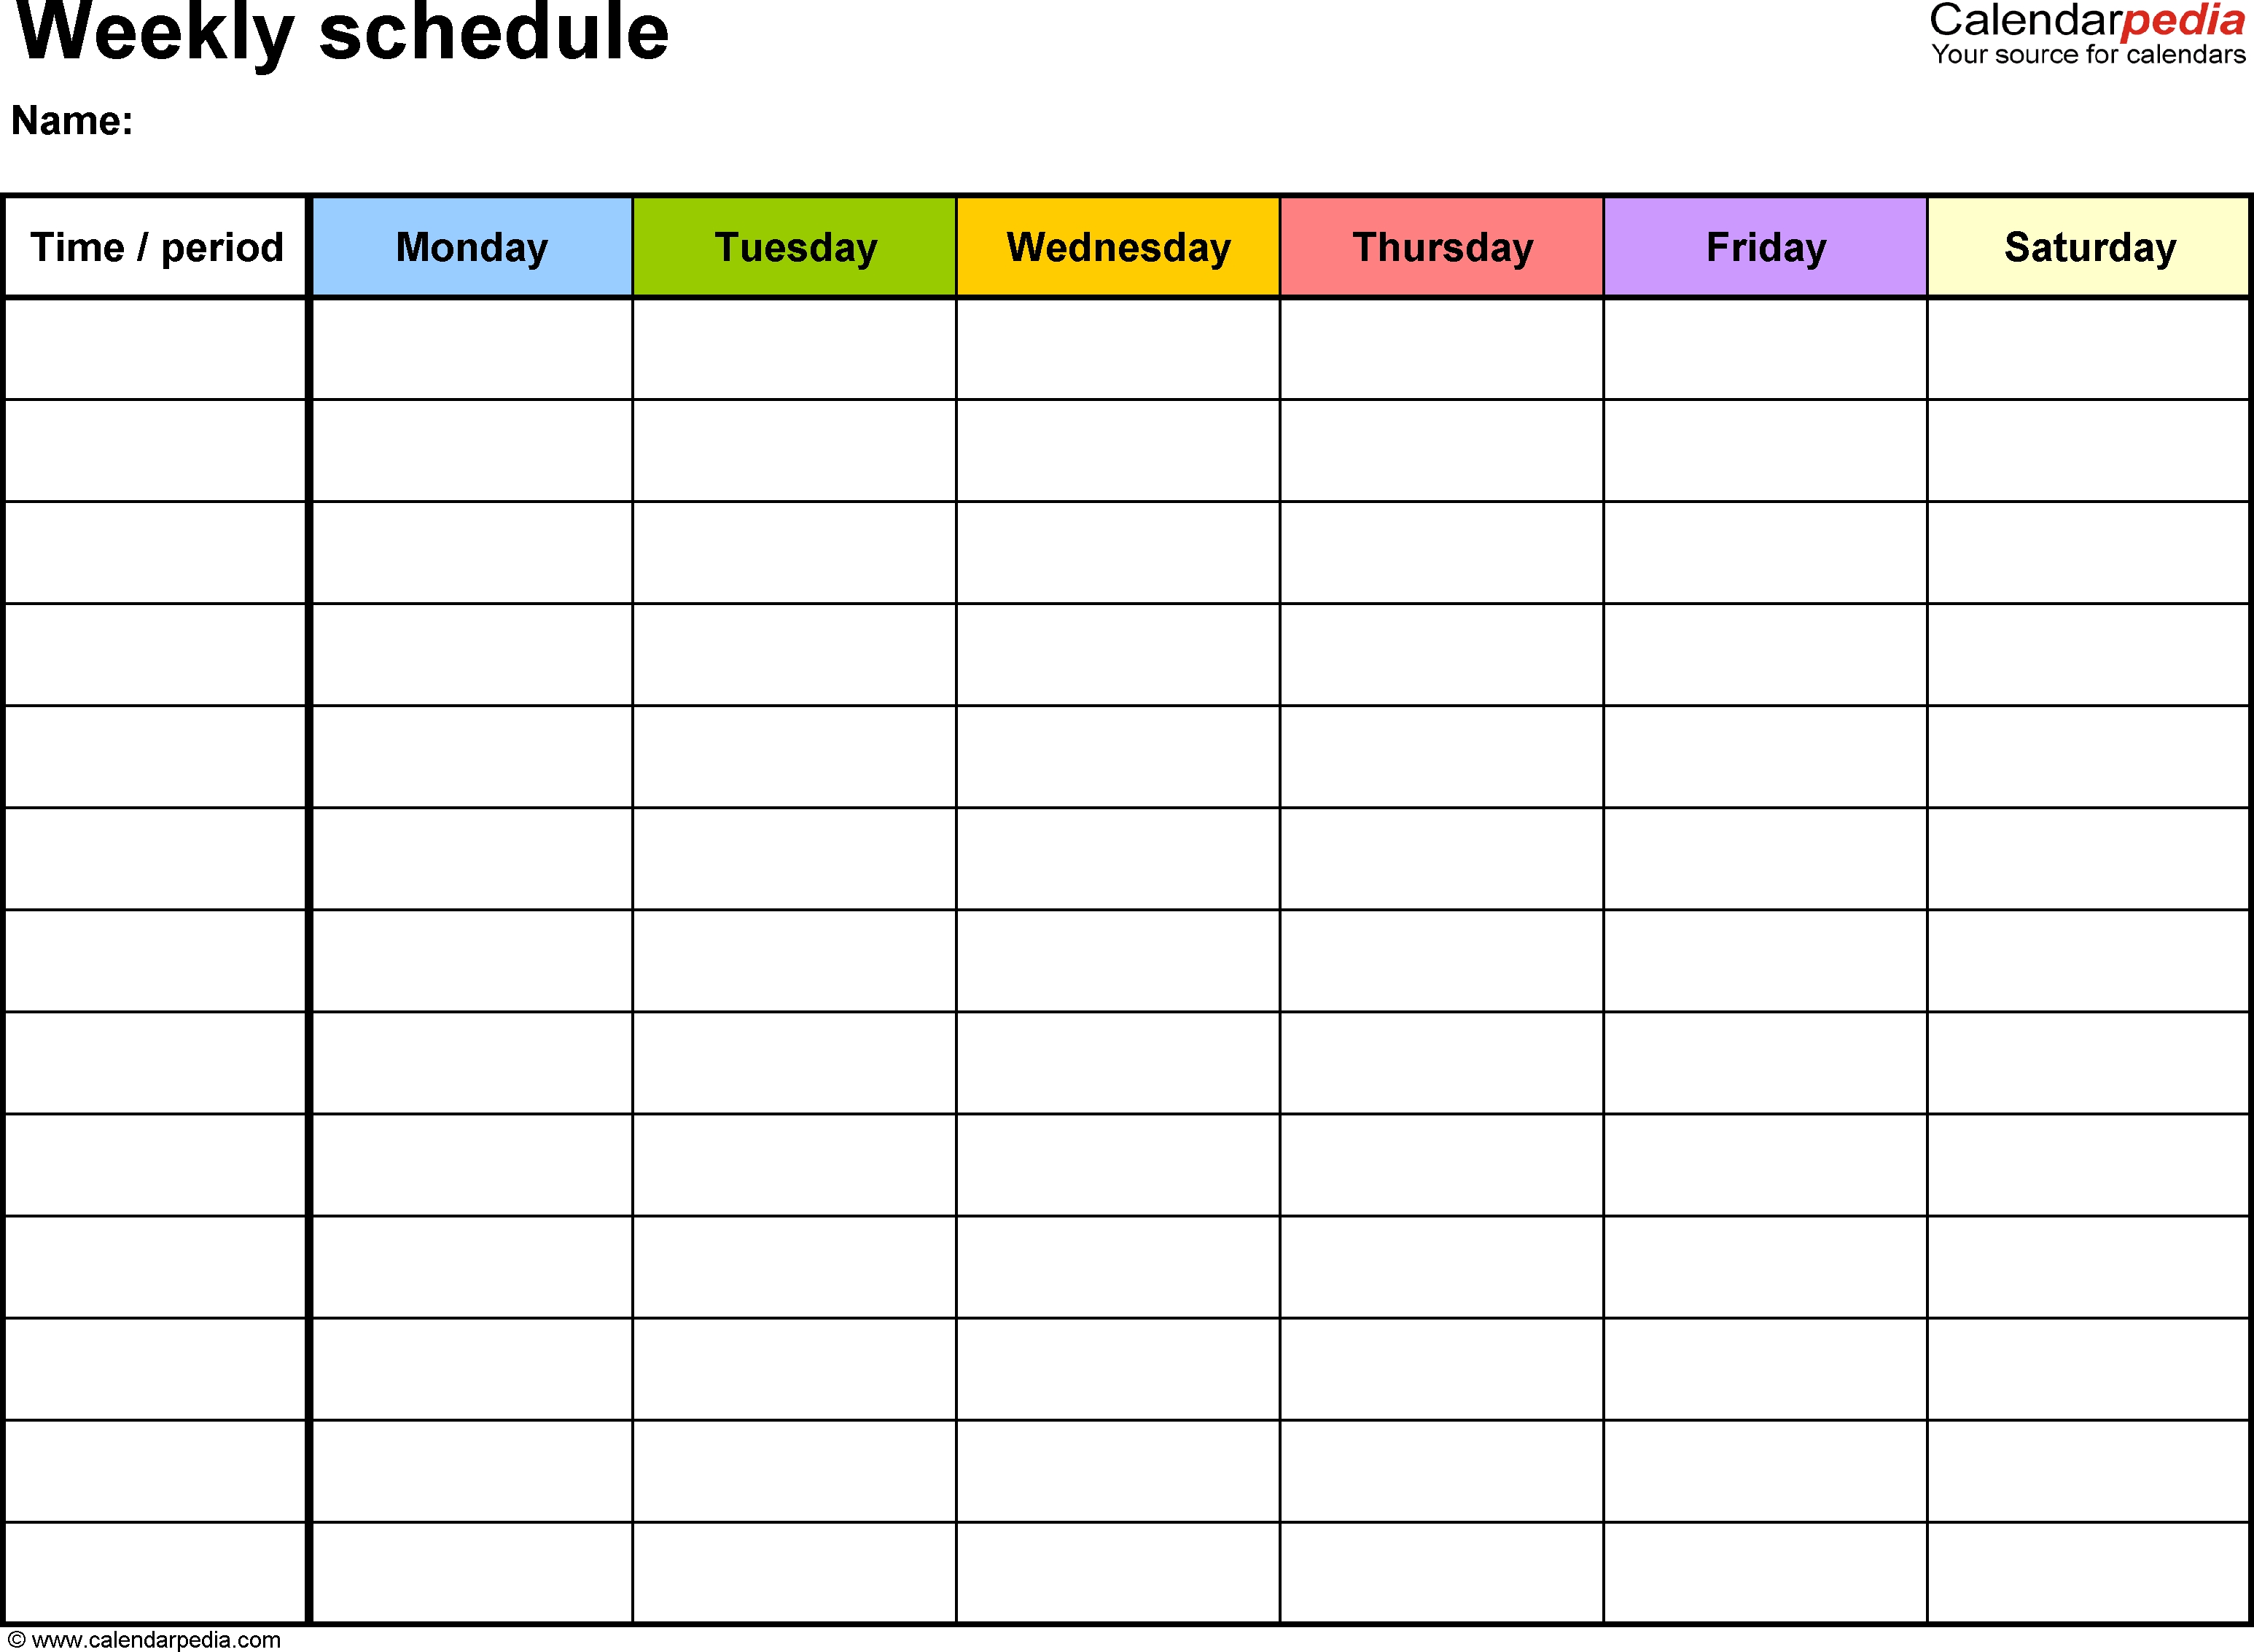 Free Weekly Schedule Templates For Word - 18 Templates-5 Day Template Calendar Blank